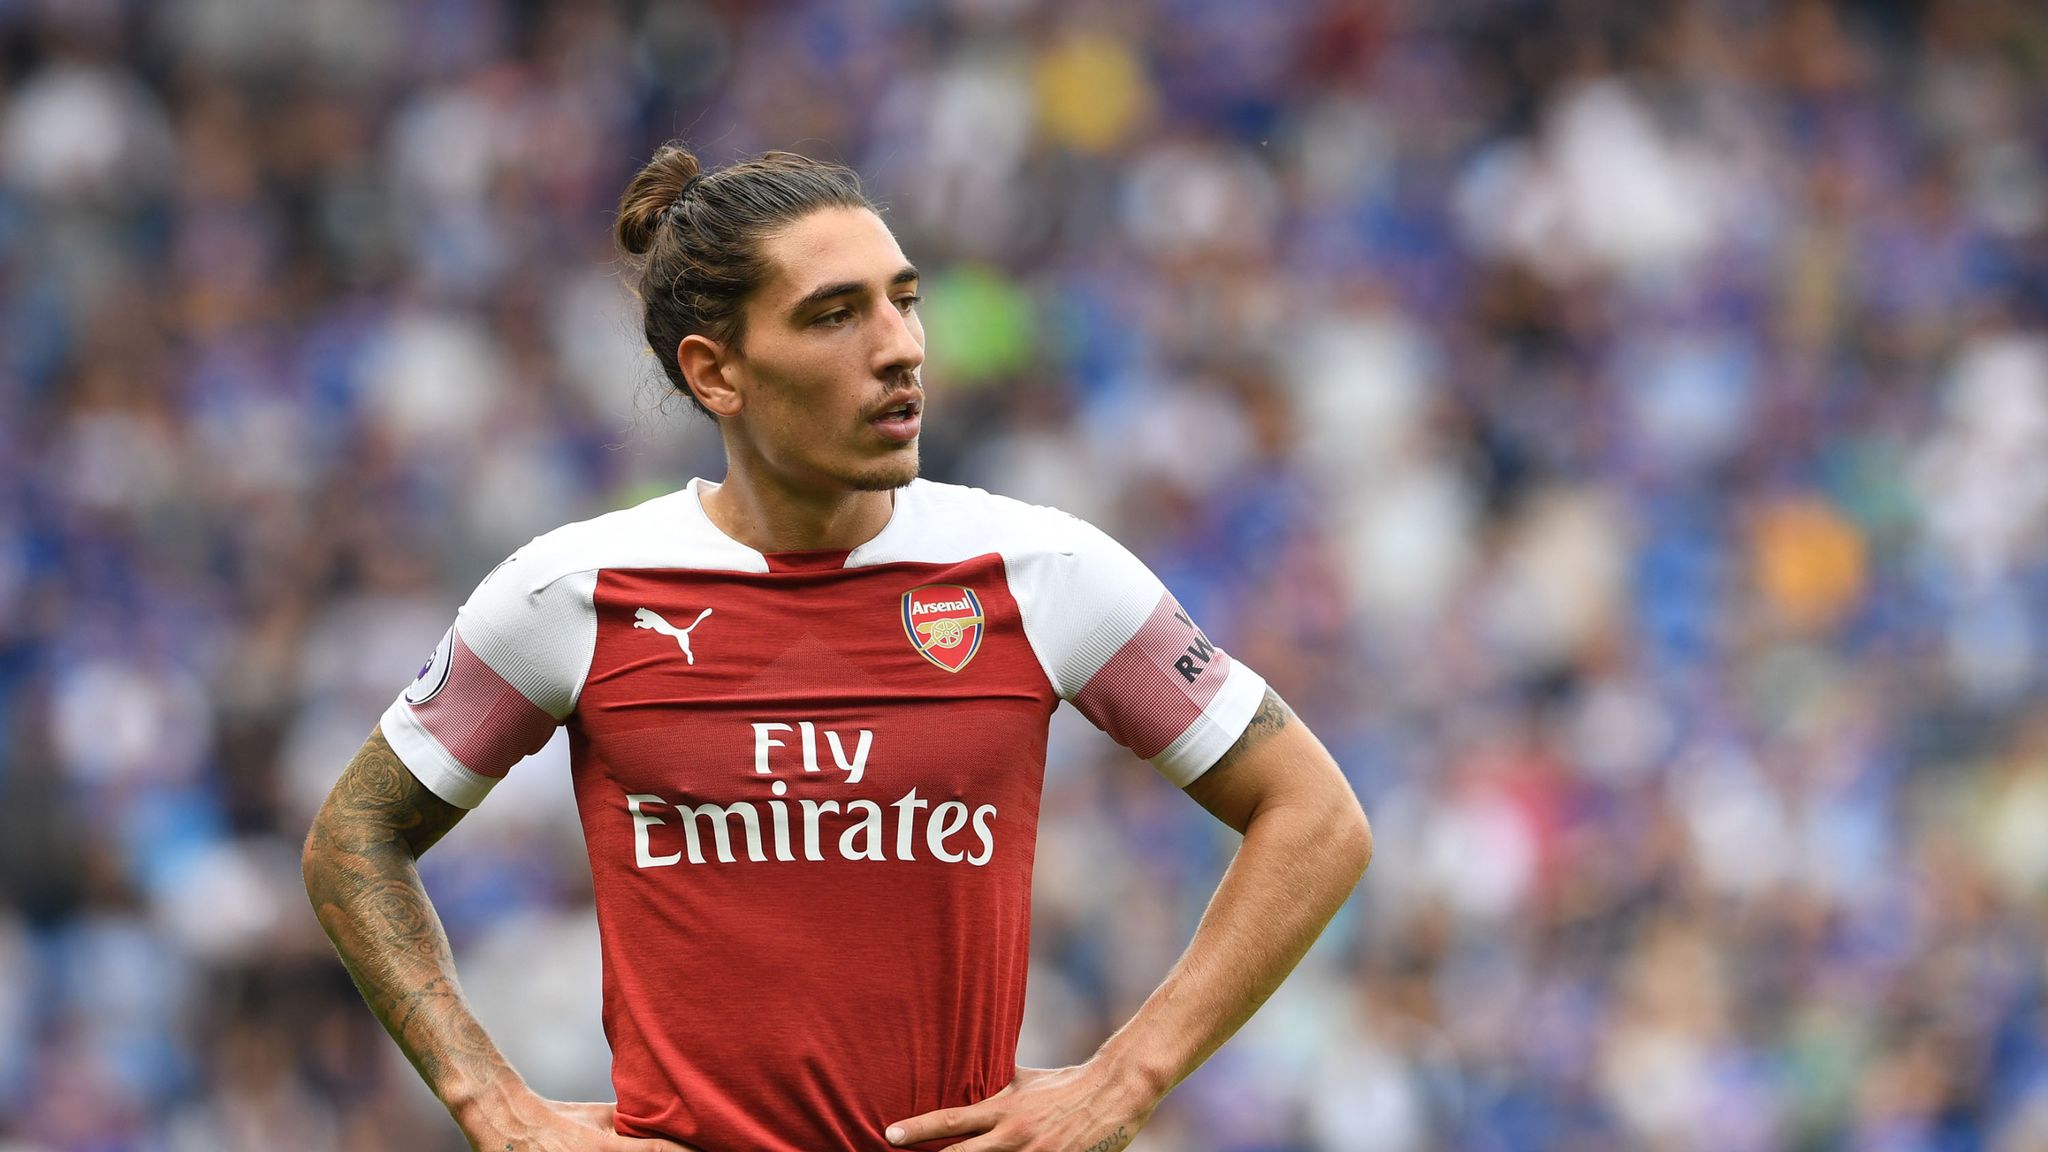 Arseblog - People getting angry about what Hector Bellerin wears